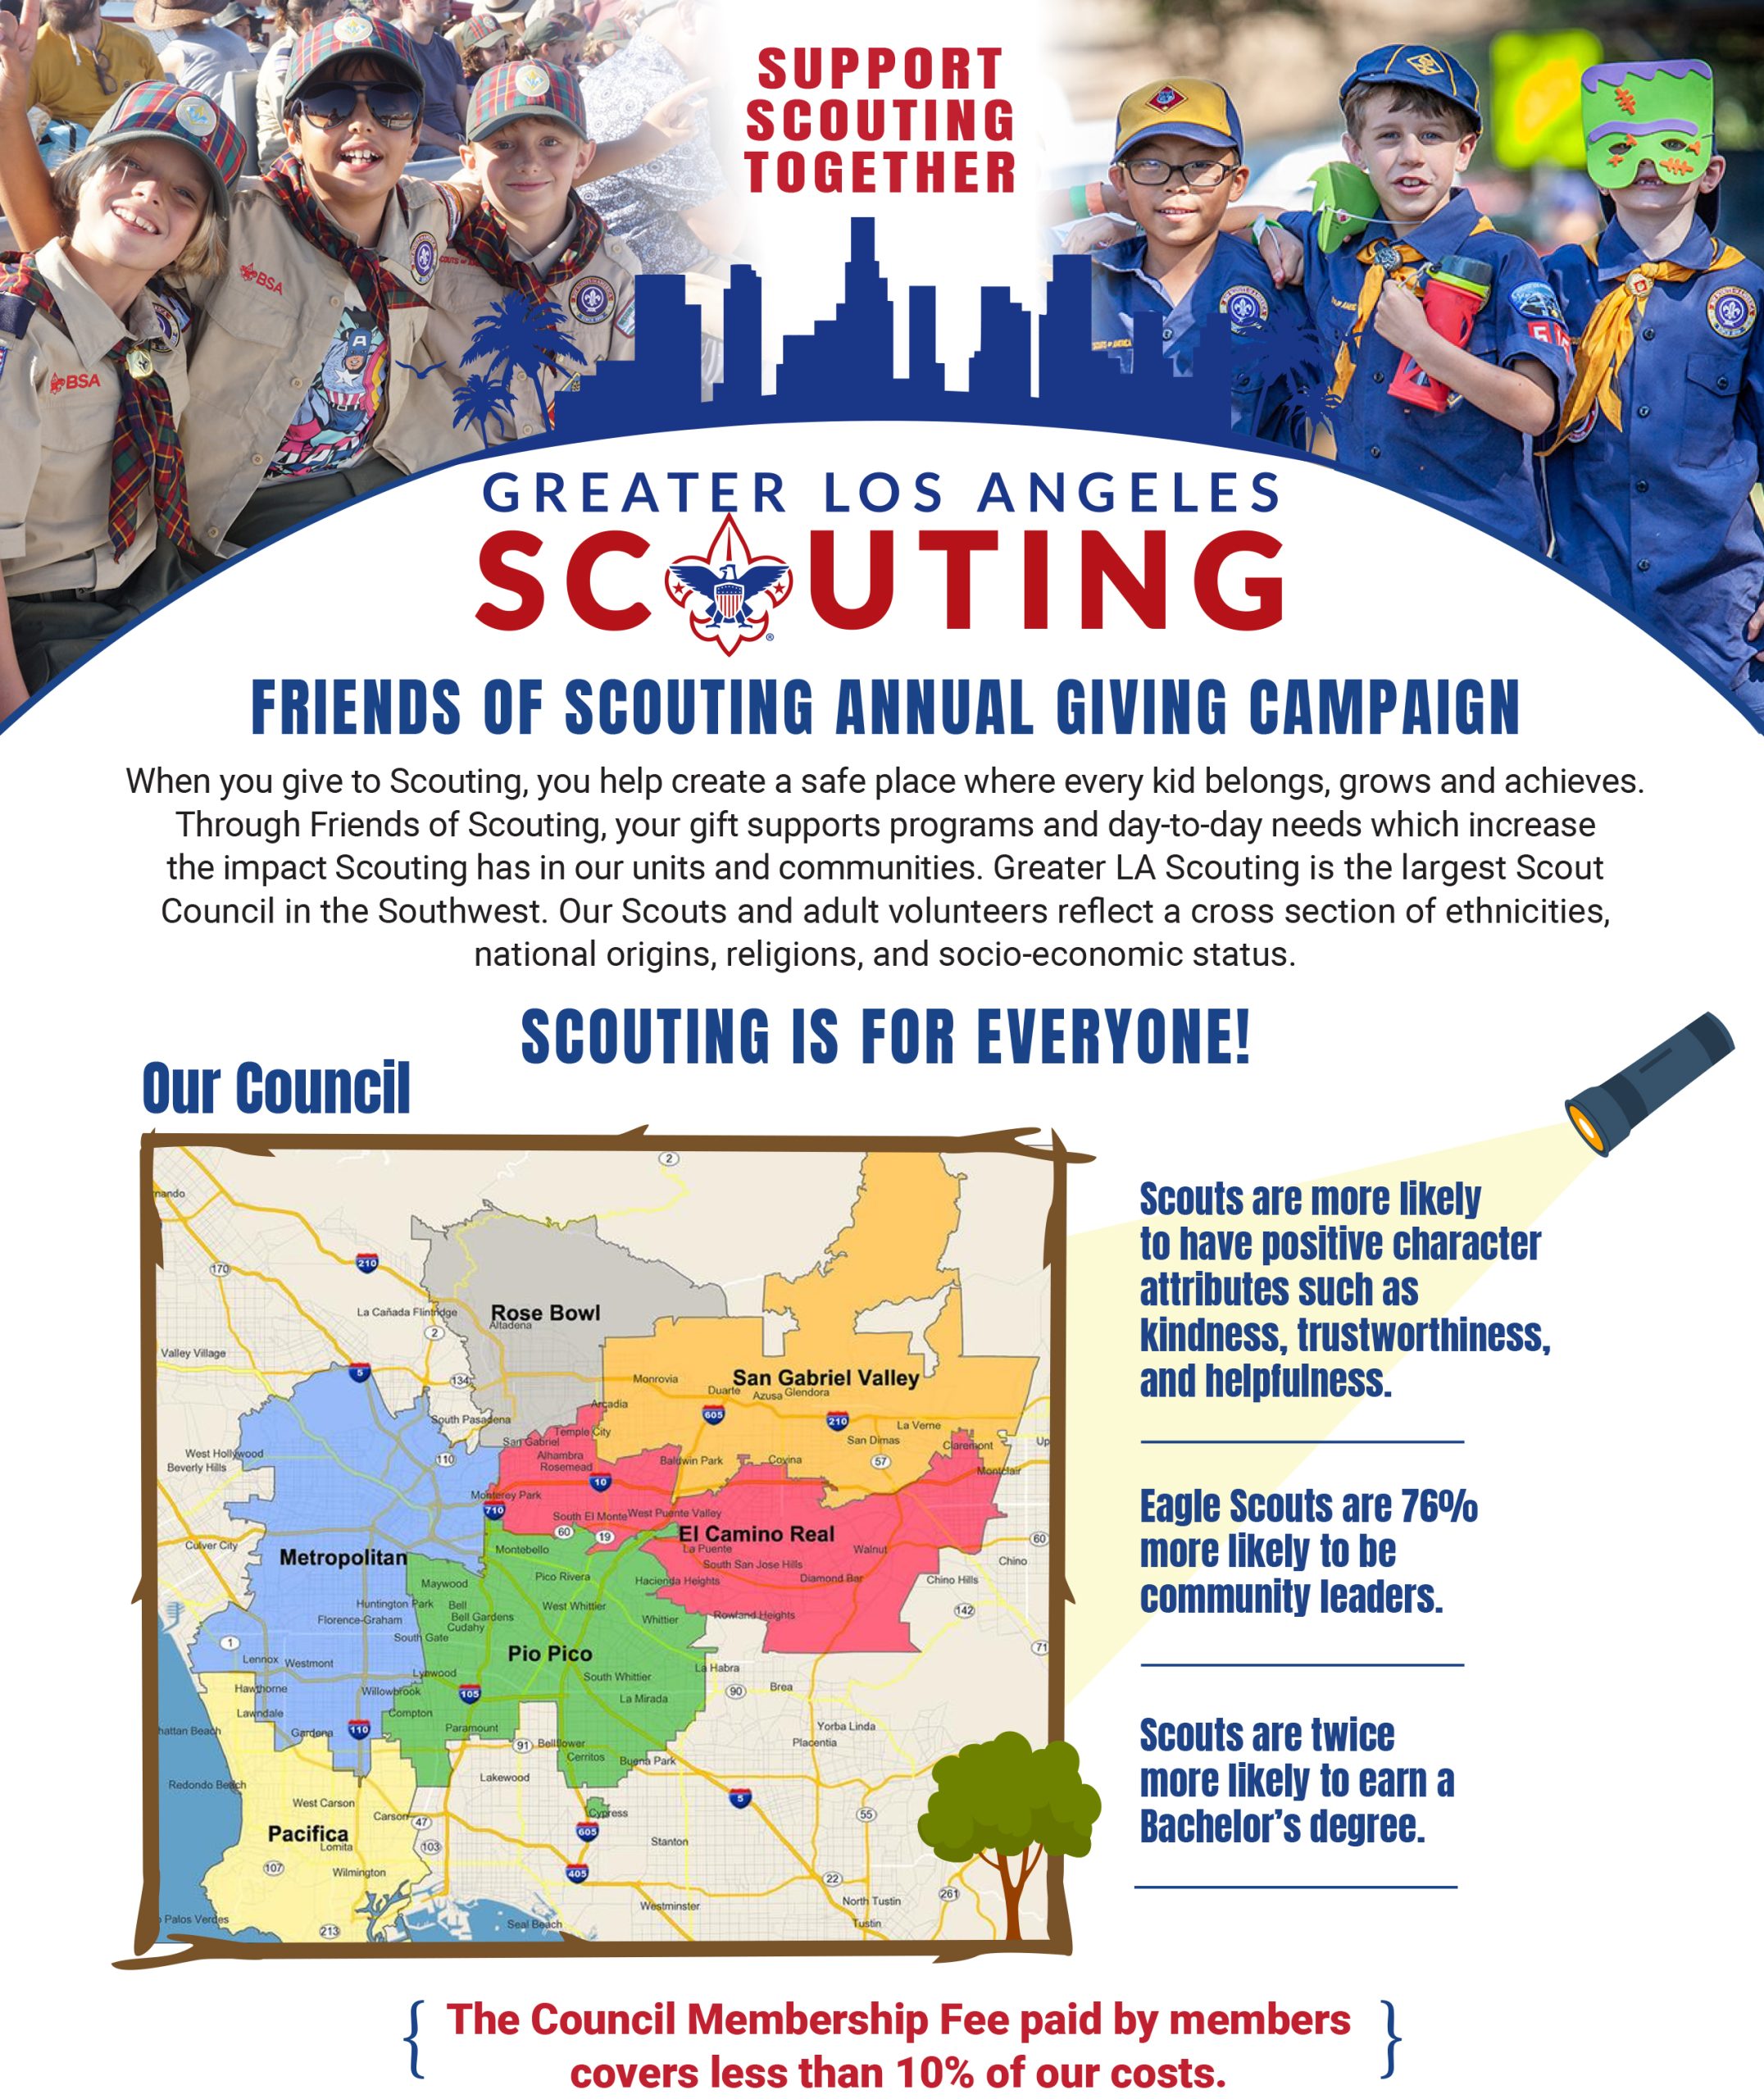 FRIENDS OF SCOUTING ANNUAL GIVING CAMPAIGN SCOUTING IS FOR EVERYONE! When you give to Scouting, you help create a safe place where every kid belongs, grows and achieves. Through Friends of Scouting, your gift supports programs and day-to-day needs which increase the impact Scouting has in our units and communities. Greater LA Scouting is the largest Scout Council in the Southwest. Our Scouts and adult volunteers reflect a cross section of ethnicities, national origins, religions, and socio-economic status. Scouts are more likely to have positive character attributes such as kindness, trustworthiness, and helpfulness. Eagle Scouts are 76% more likely to be community leaders. Scouts are twice more likely to earn a Bachelor’s degree. The Council Membership Fees paid by members cover less than 10% of our operating costs.